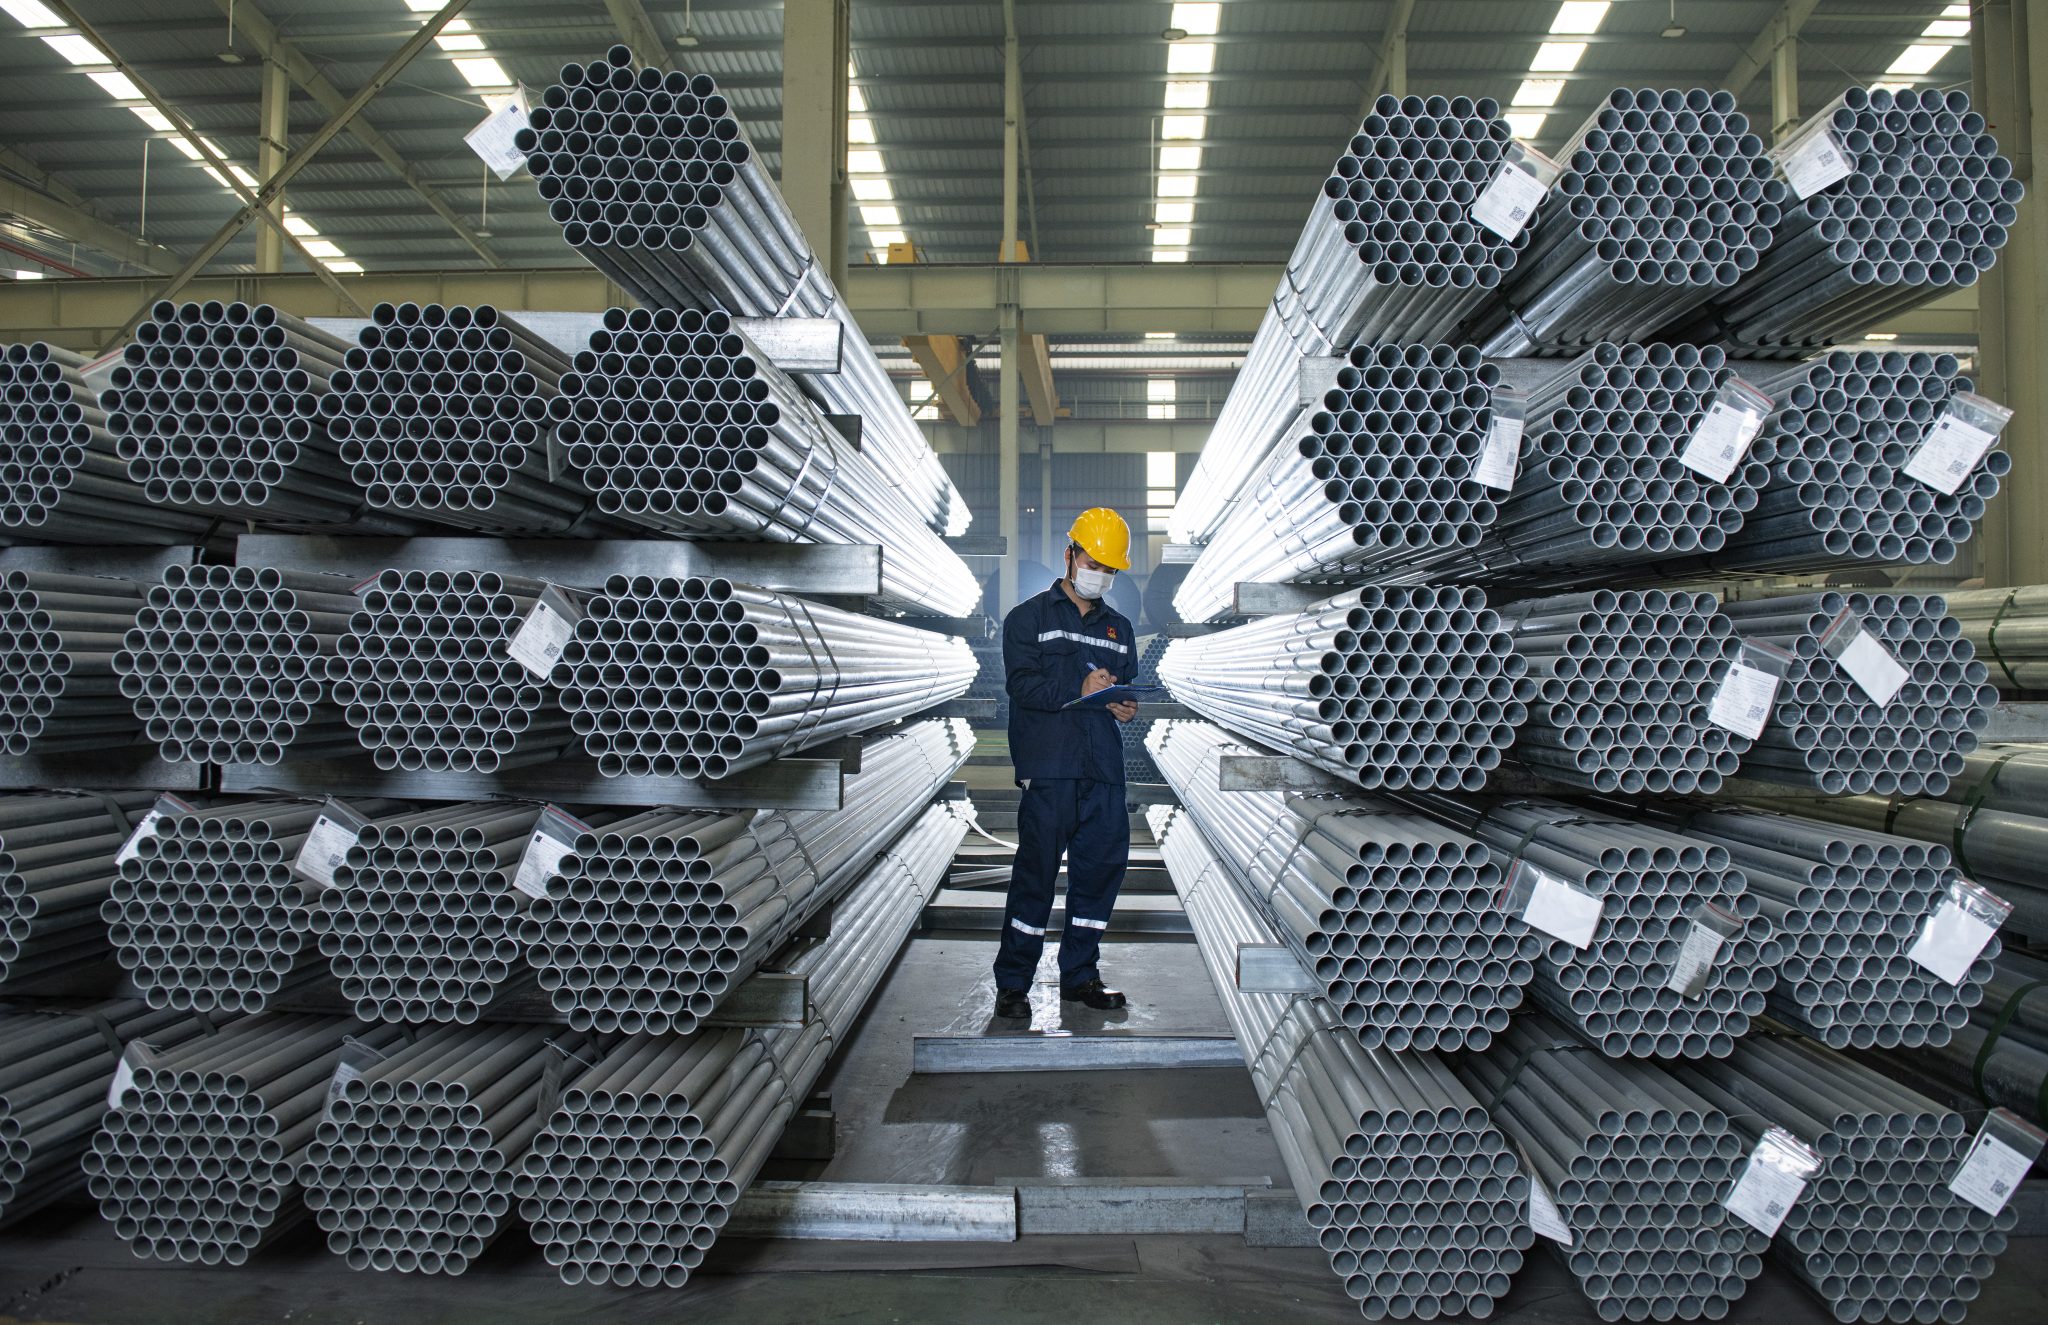 Hoa Sen hot-dip galvanized pipe products with outstanding quality are a trusted choice in many countries in the world.